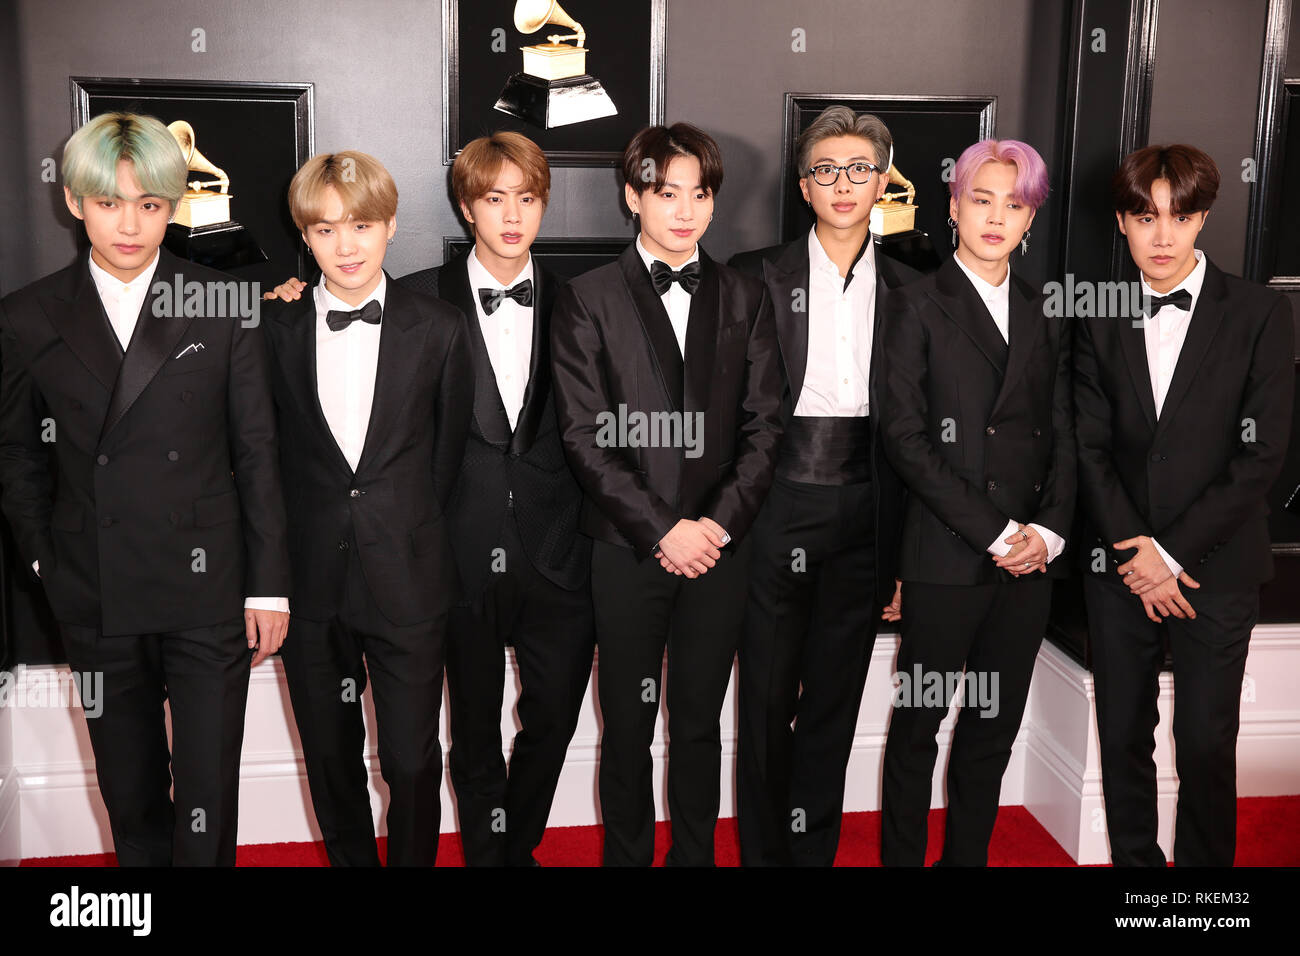 Why BTS' Attendance at the 61st Annual Grammy Awards was Significant?, by  Wandering Shadow